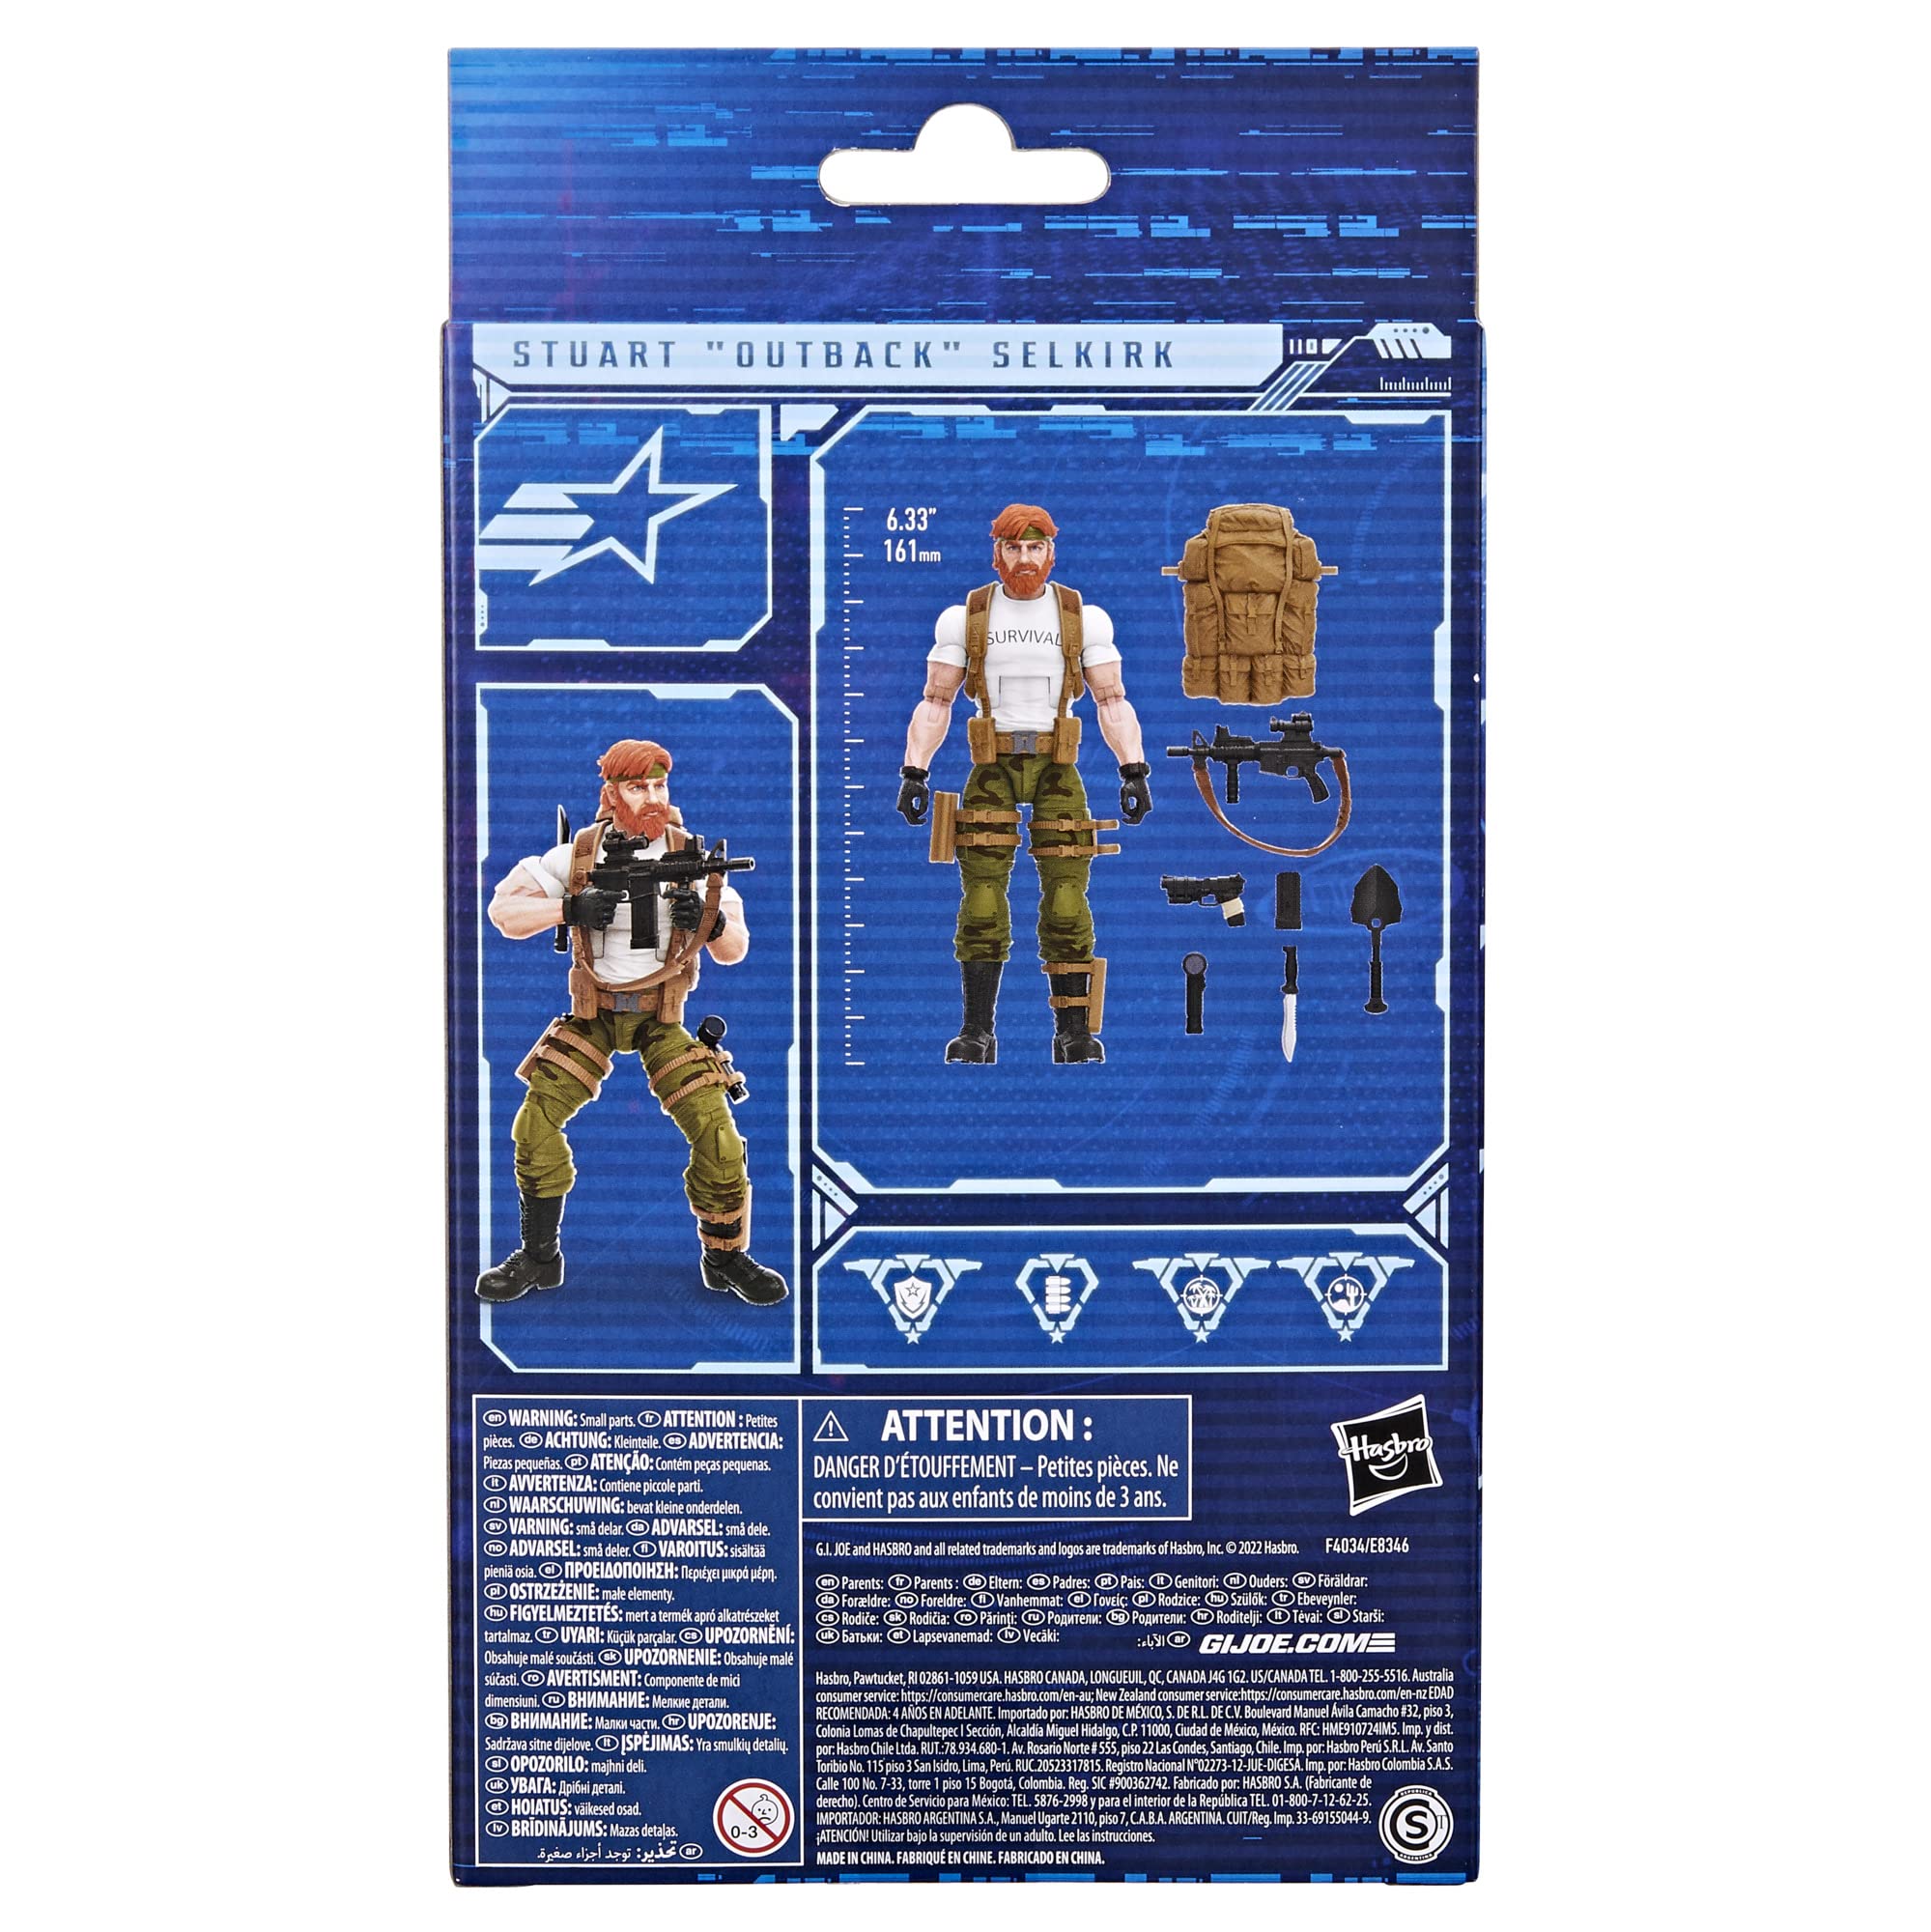 G.I. Joe Classified Series Stuart Outback Selkirk Action Figure 63 Collectible Premium Toy with Accessories 6-Inch-Scale Custom Package Art, Multicolor